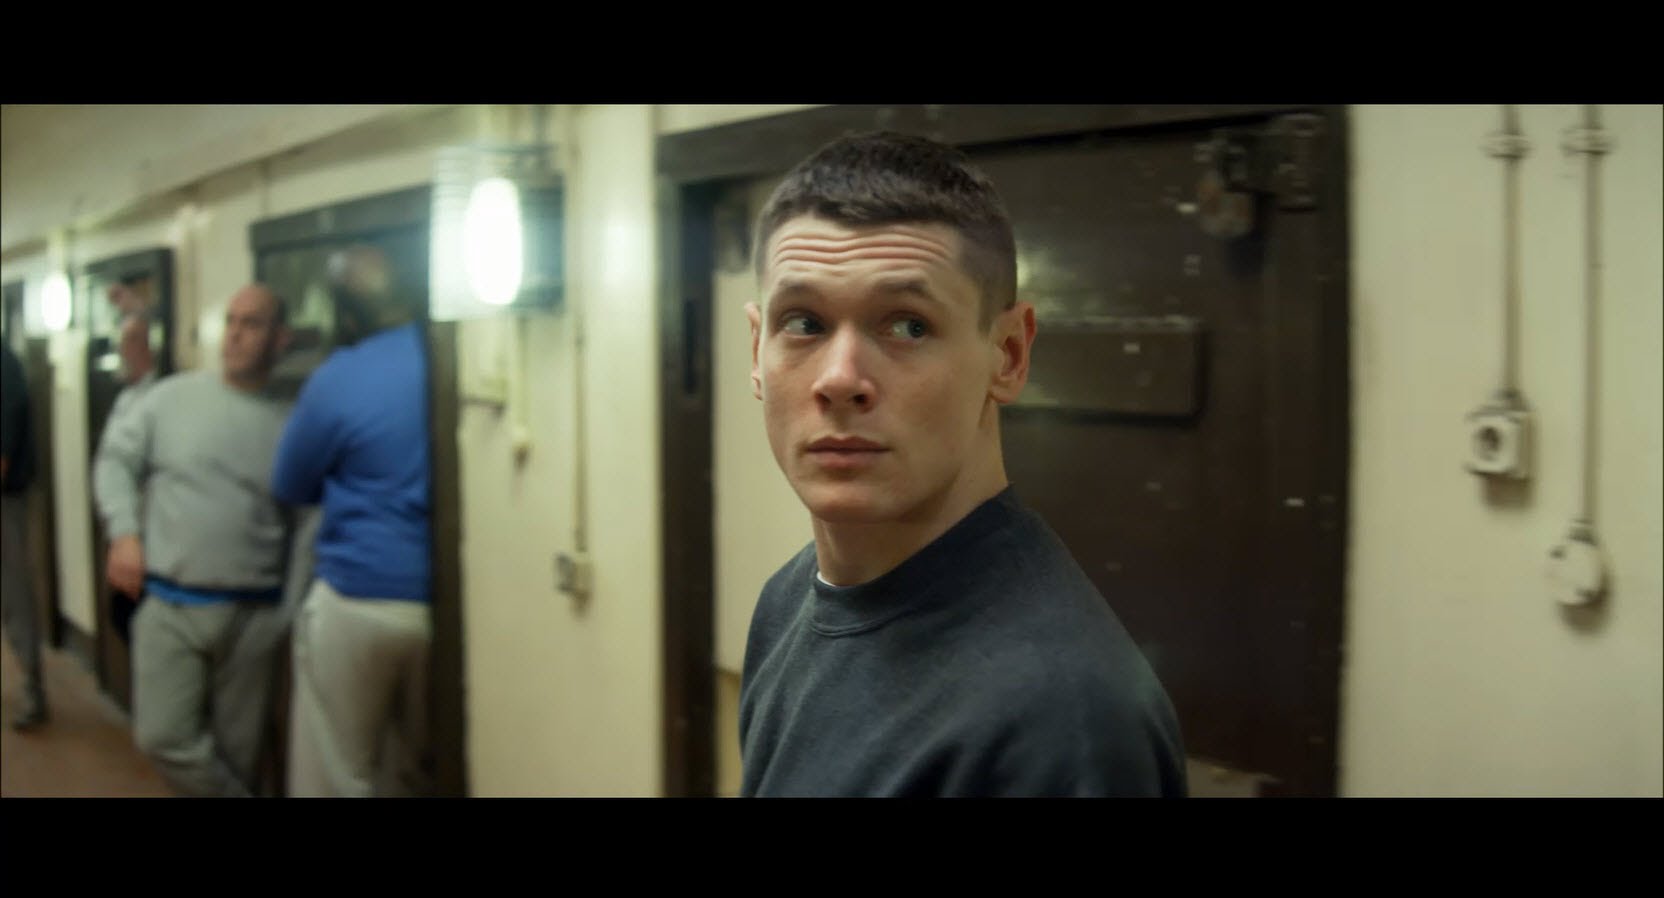 Watch: STARRED UP brand new UK trailer @starred_up @JackO__C - FLAVOURMAG